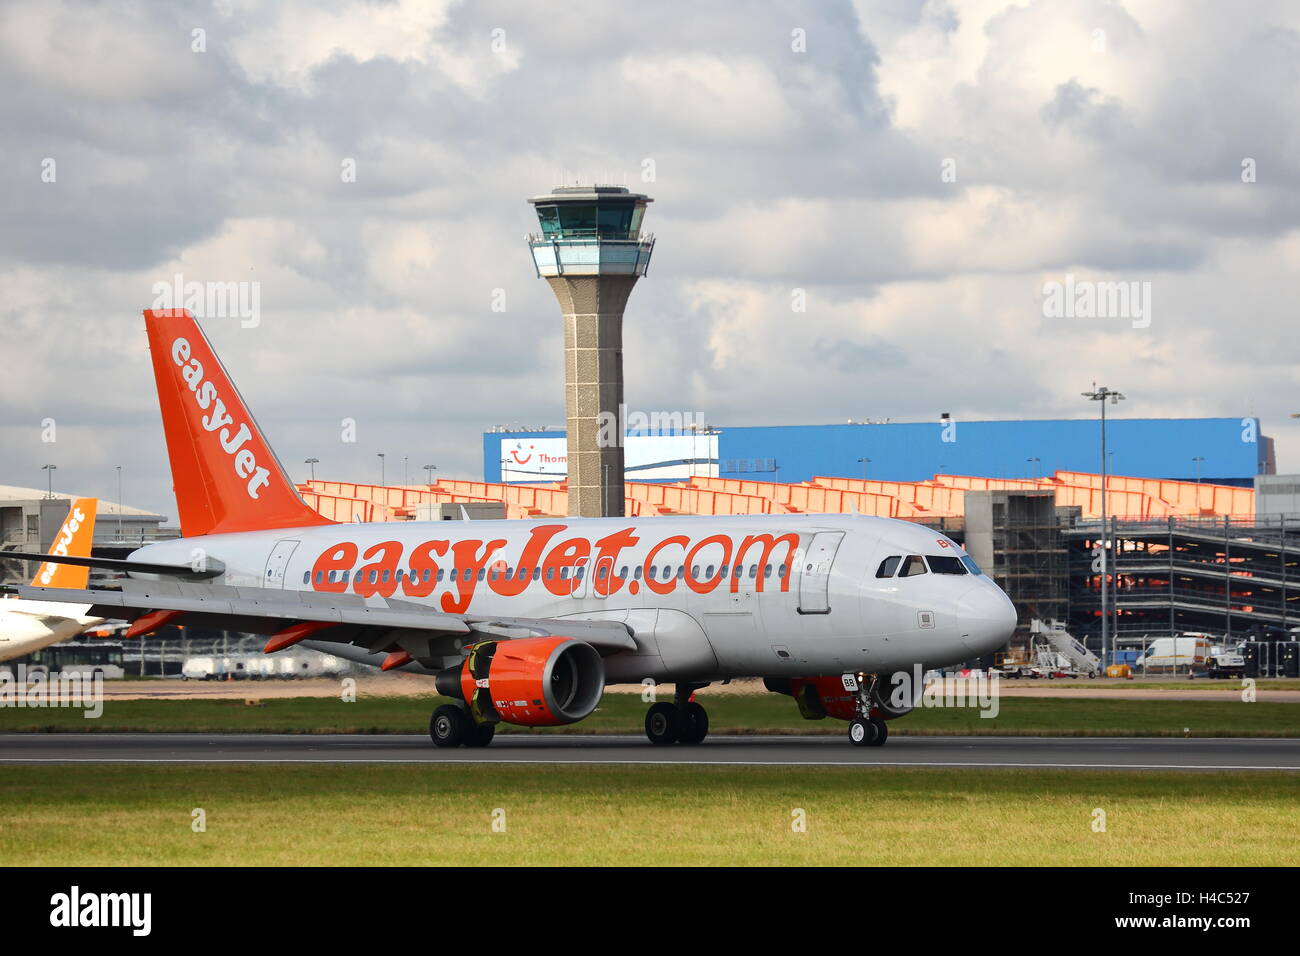 Low-cost airline Easyjet Airbus A319 G-EZBB landing at London Luton Airport, UK Stock Photo